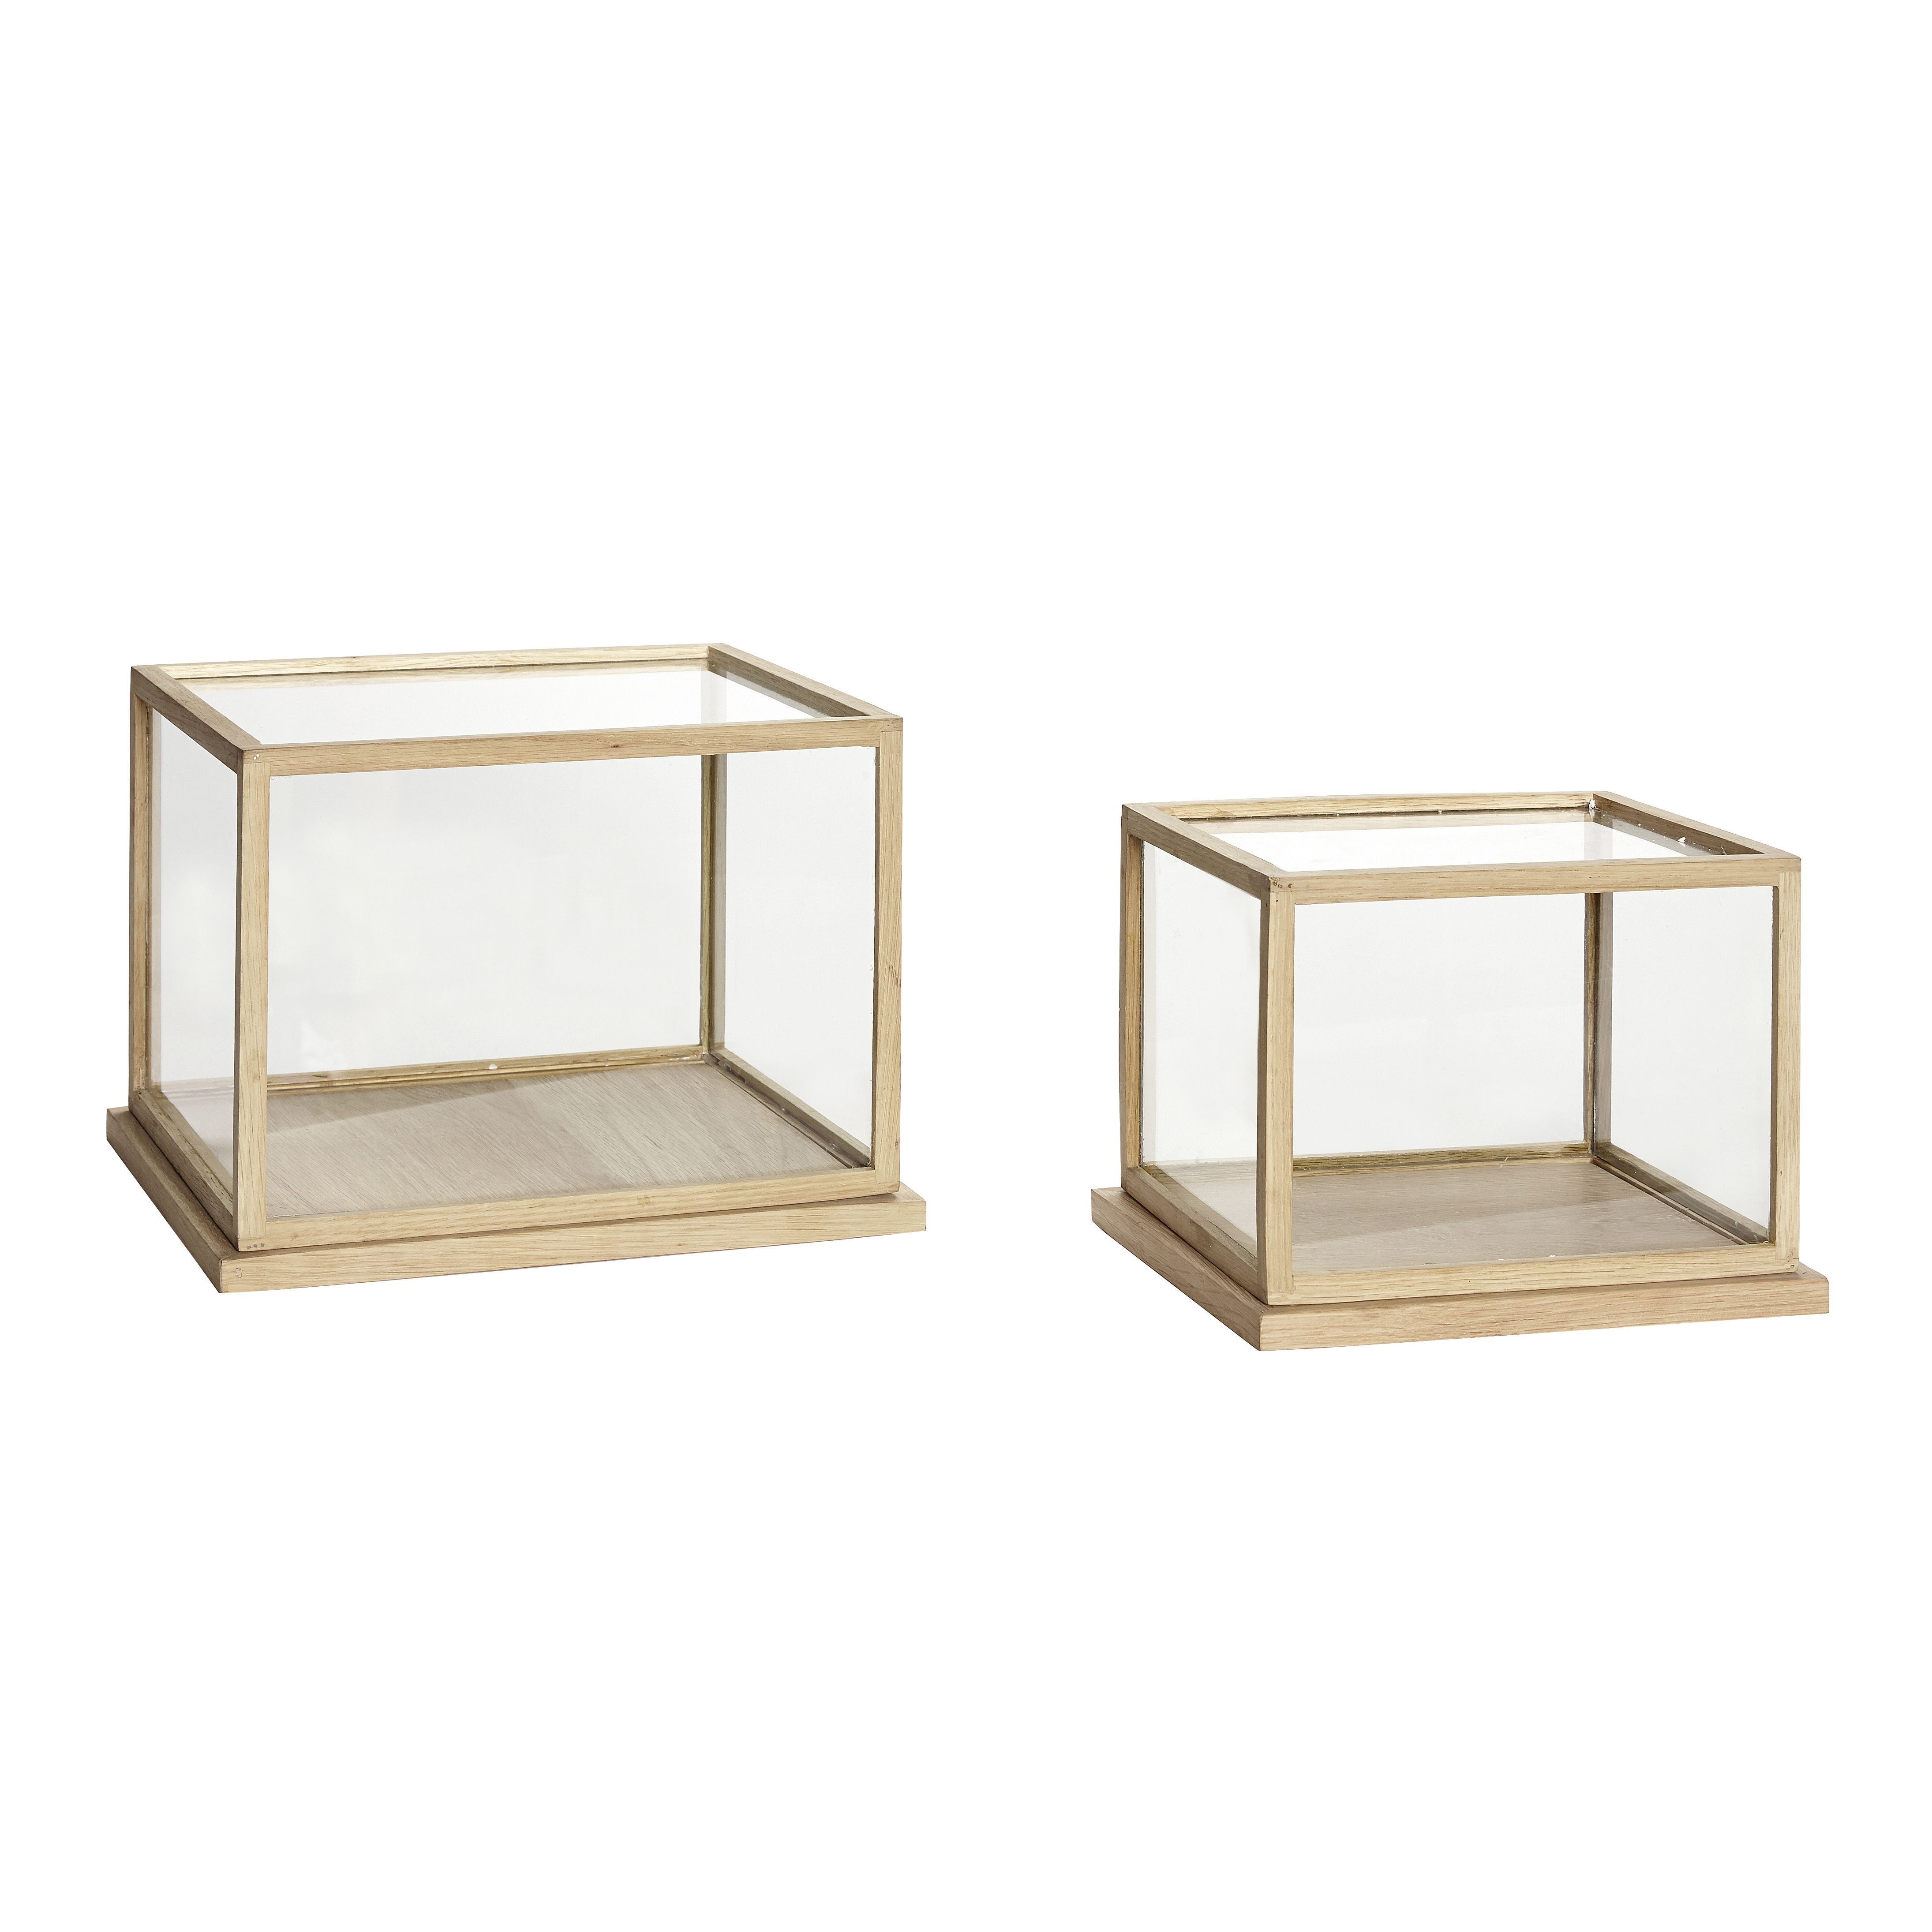 Hübsch Spectacle Display Boxes Set Of 2, Small